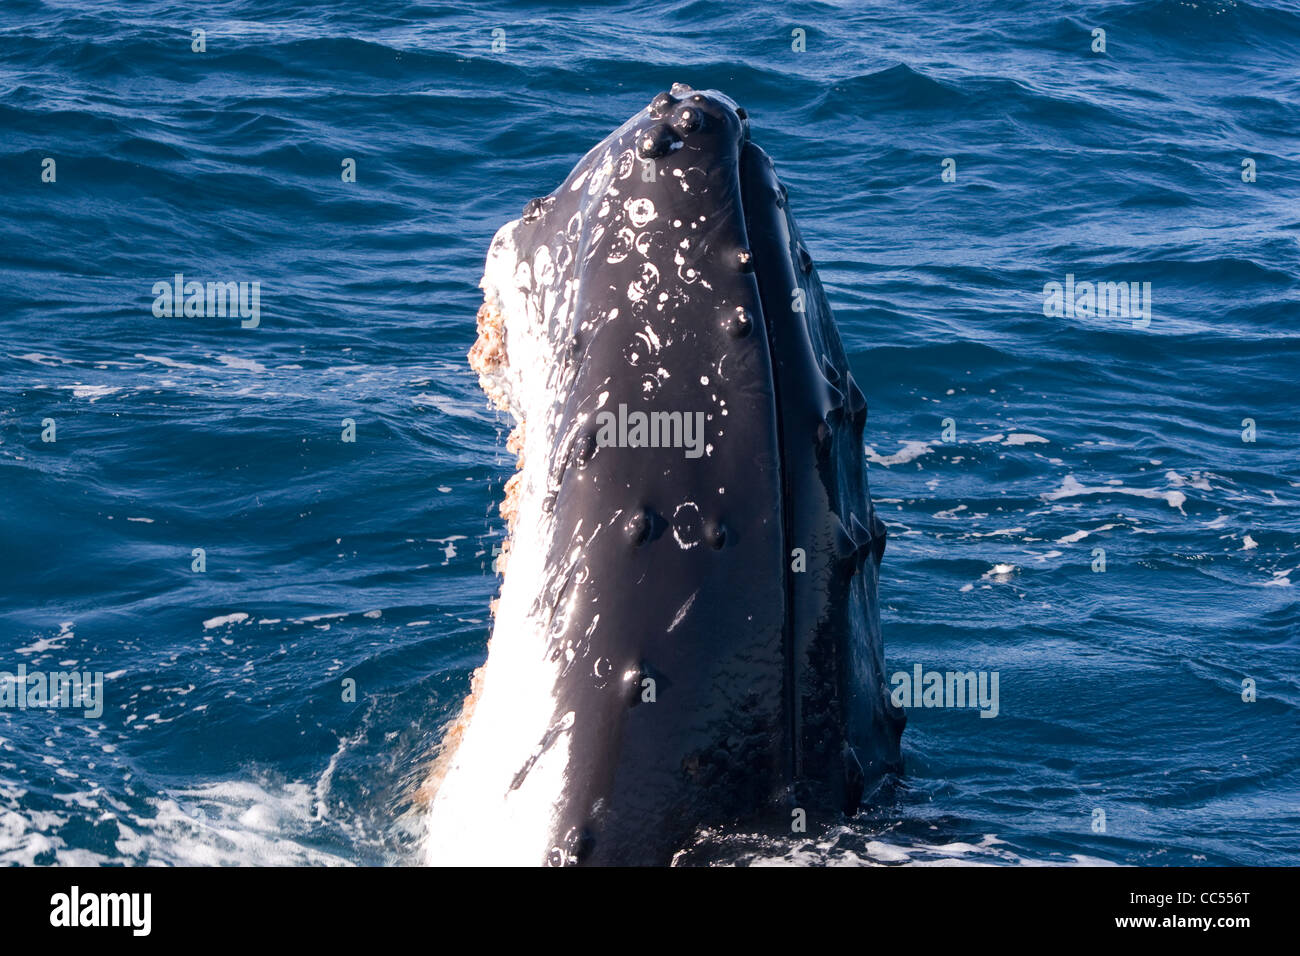 Humpback Whale spyhopping. Stock Photo